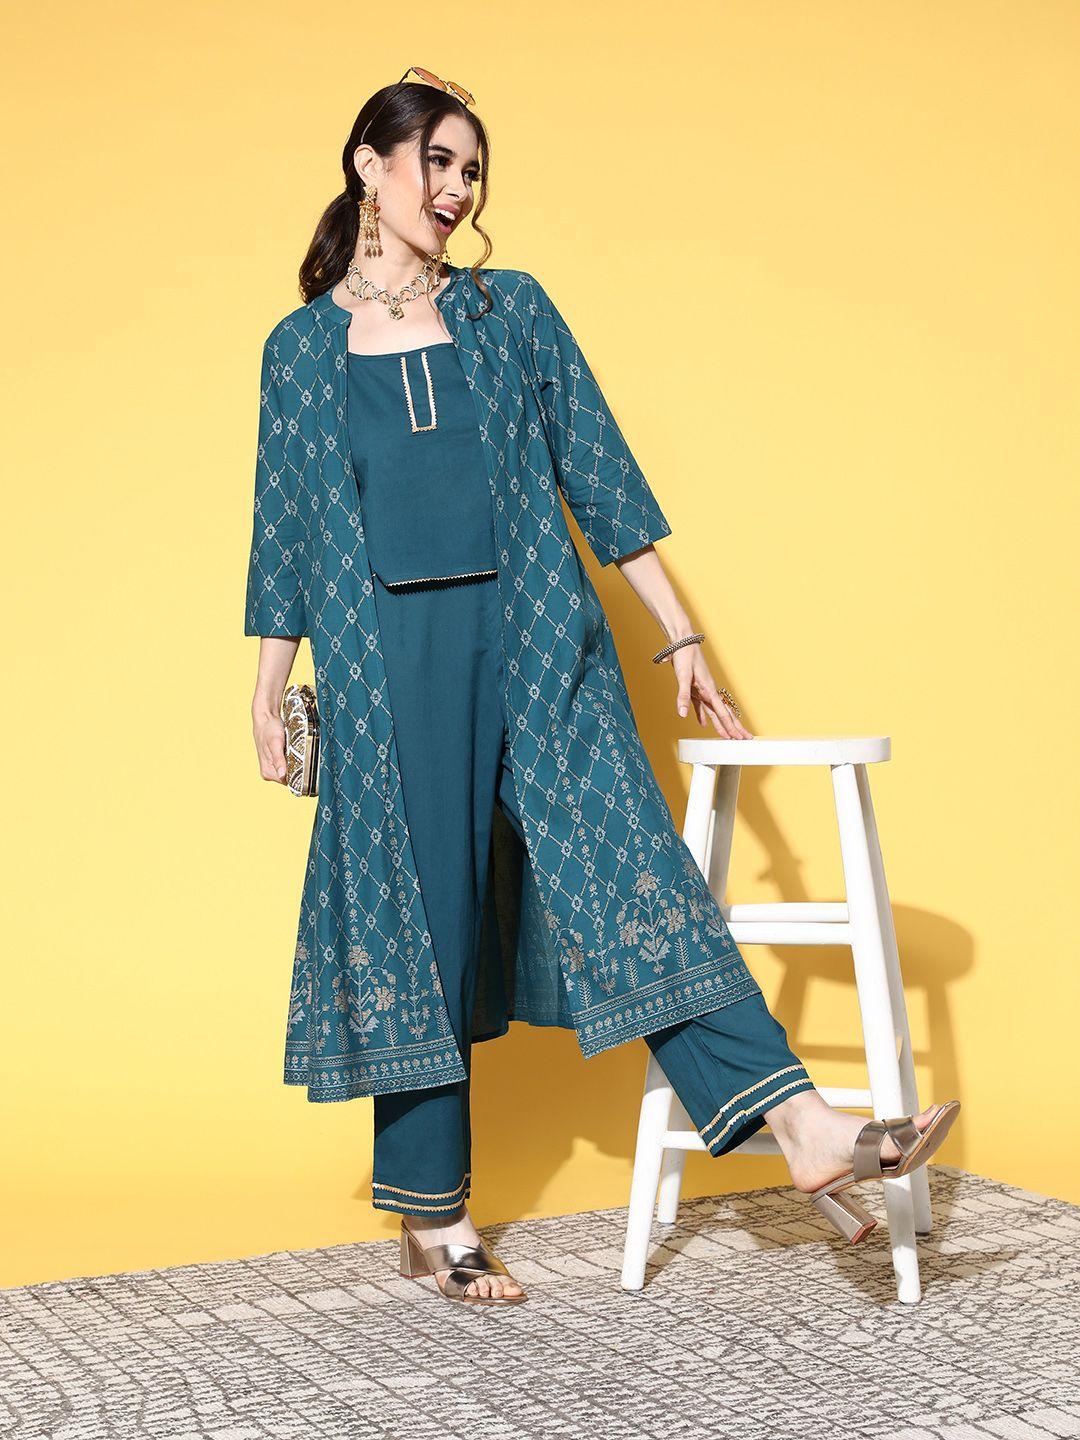 sangria-women-teal-green-and-golden-ethnic-print-pure-cotton-gota-patti-detail-co-ords